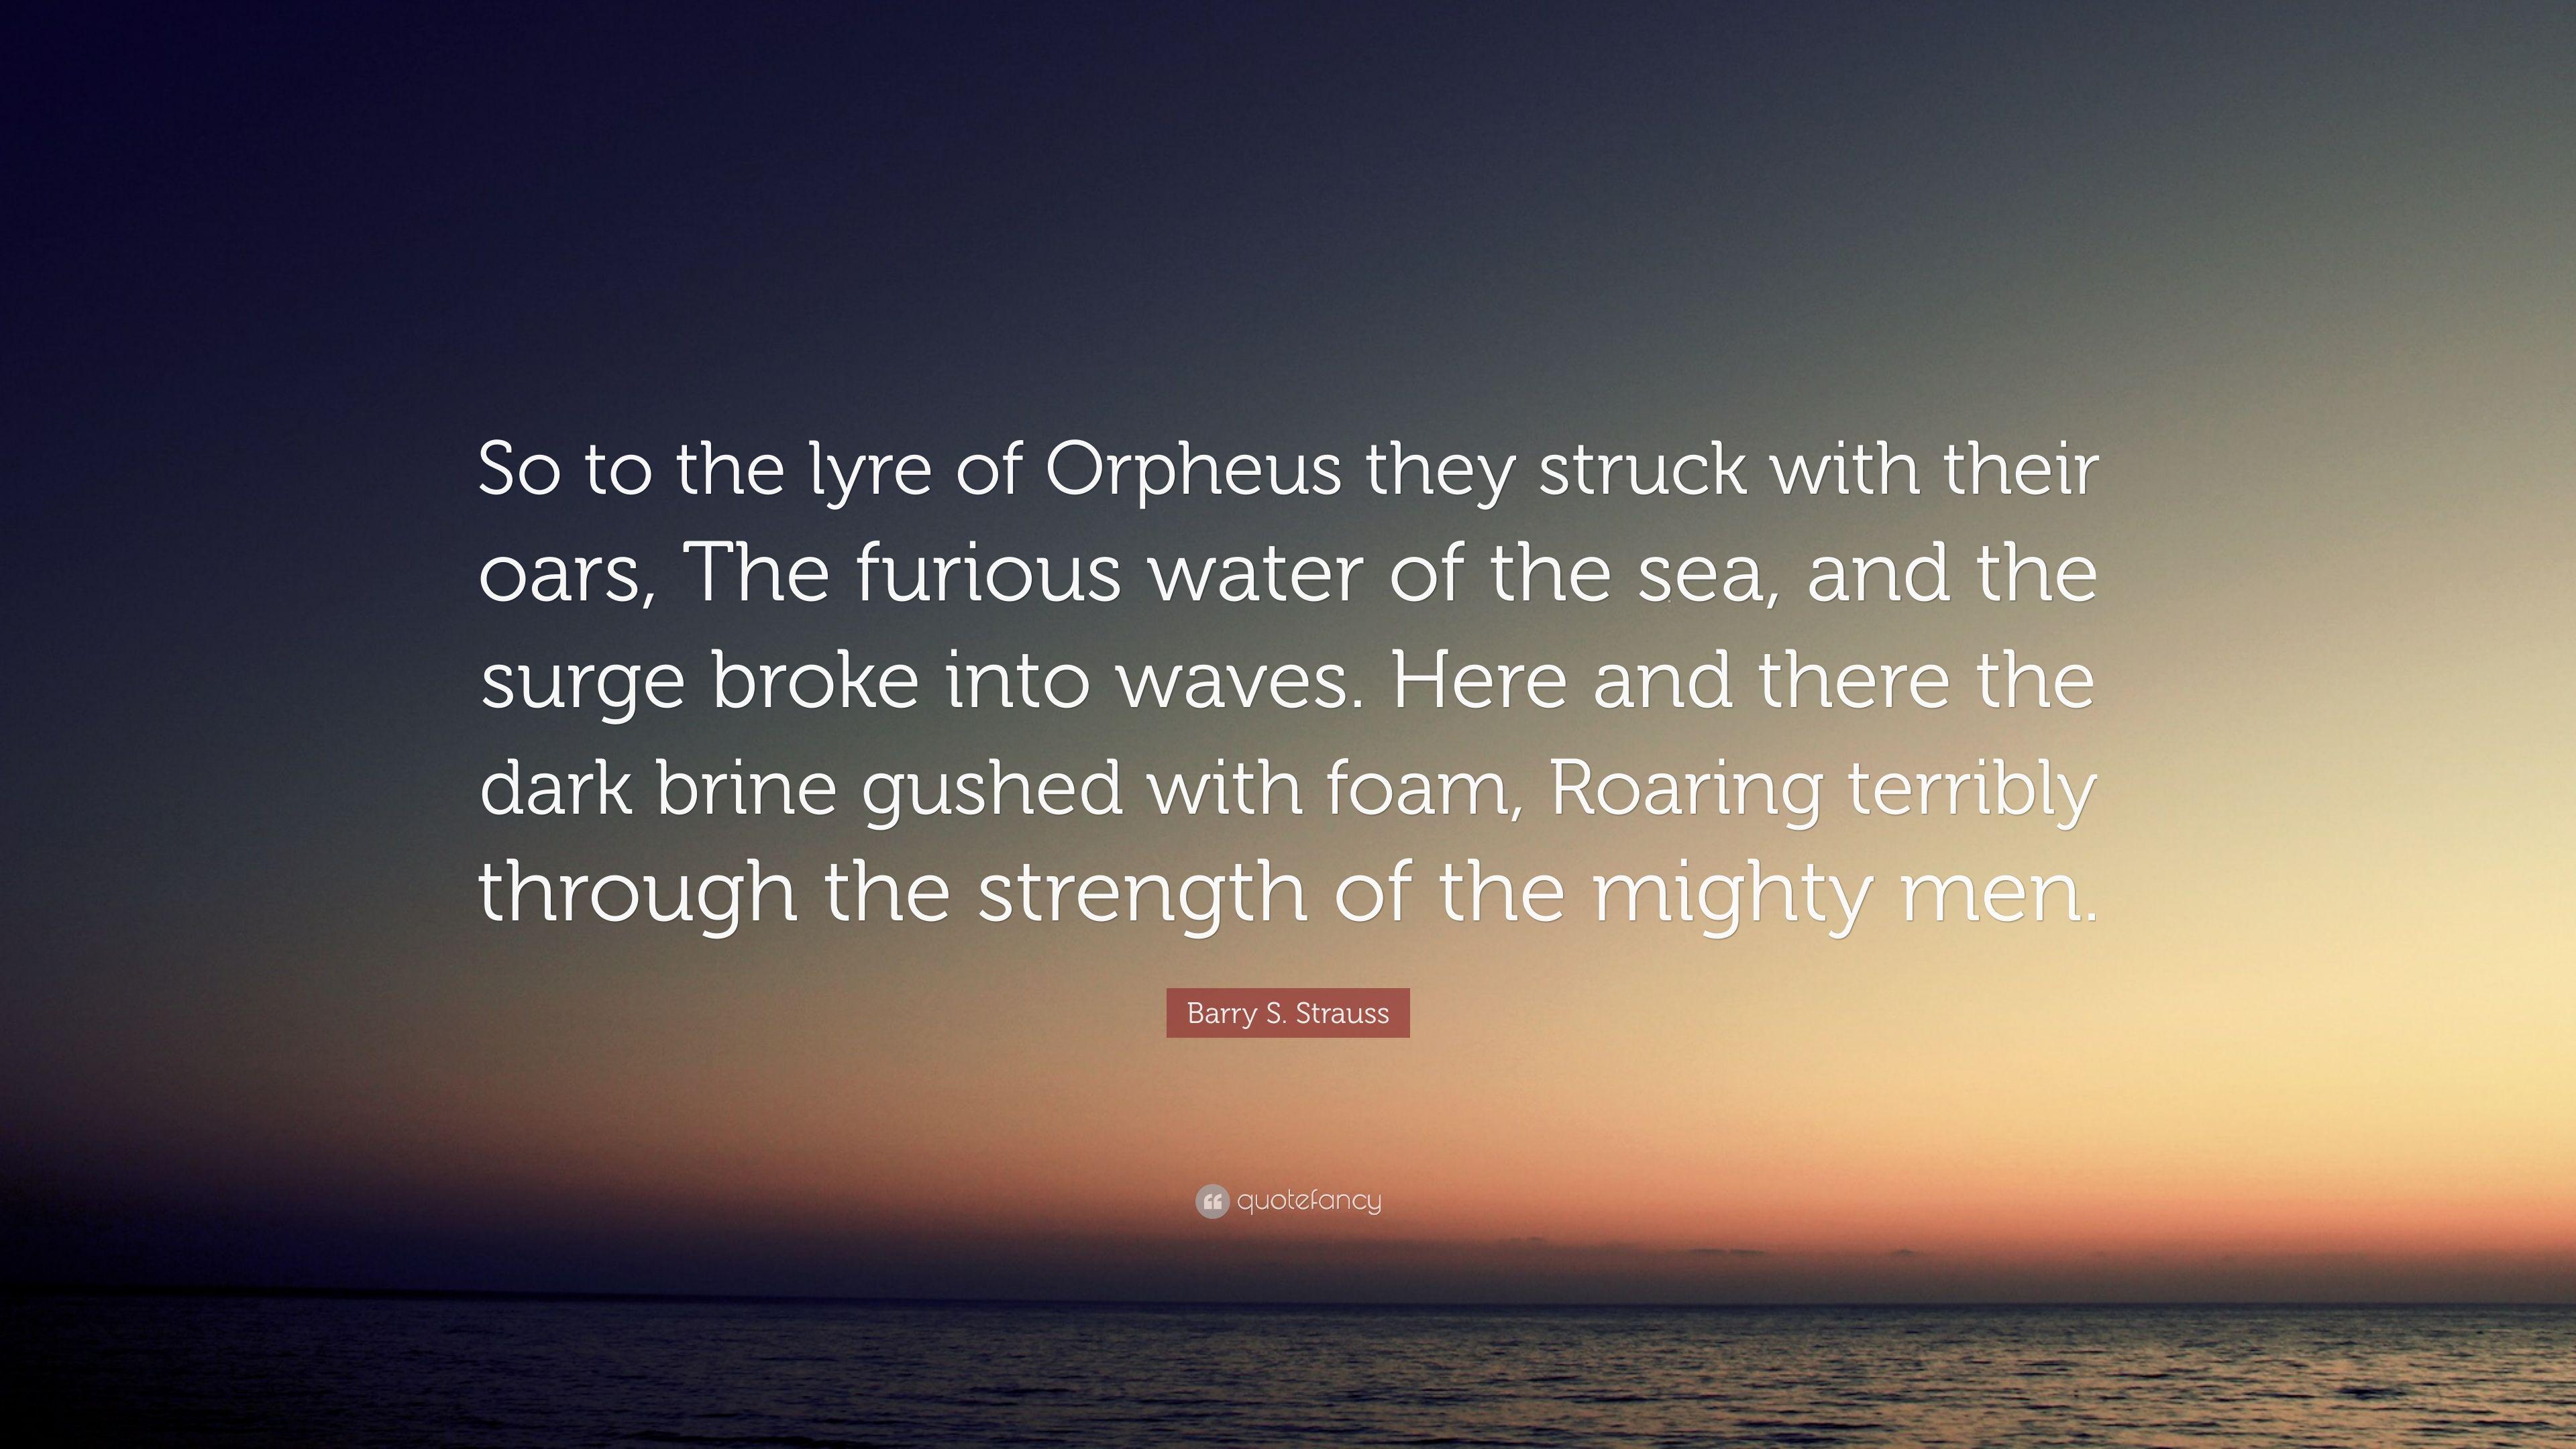 Barry S. Strauss Quote: “So to the lyre of Orpheus they struck